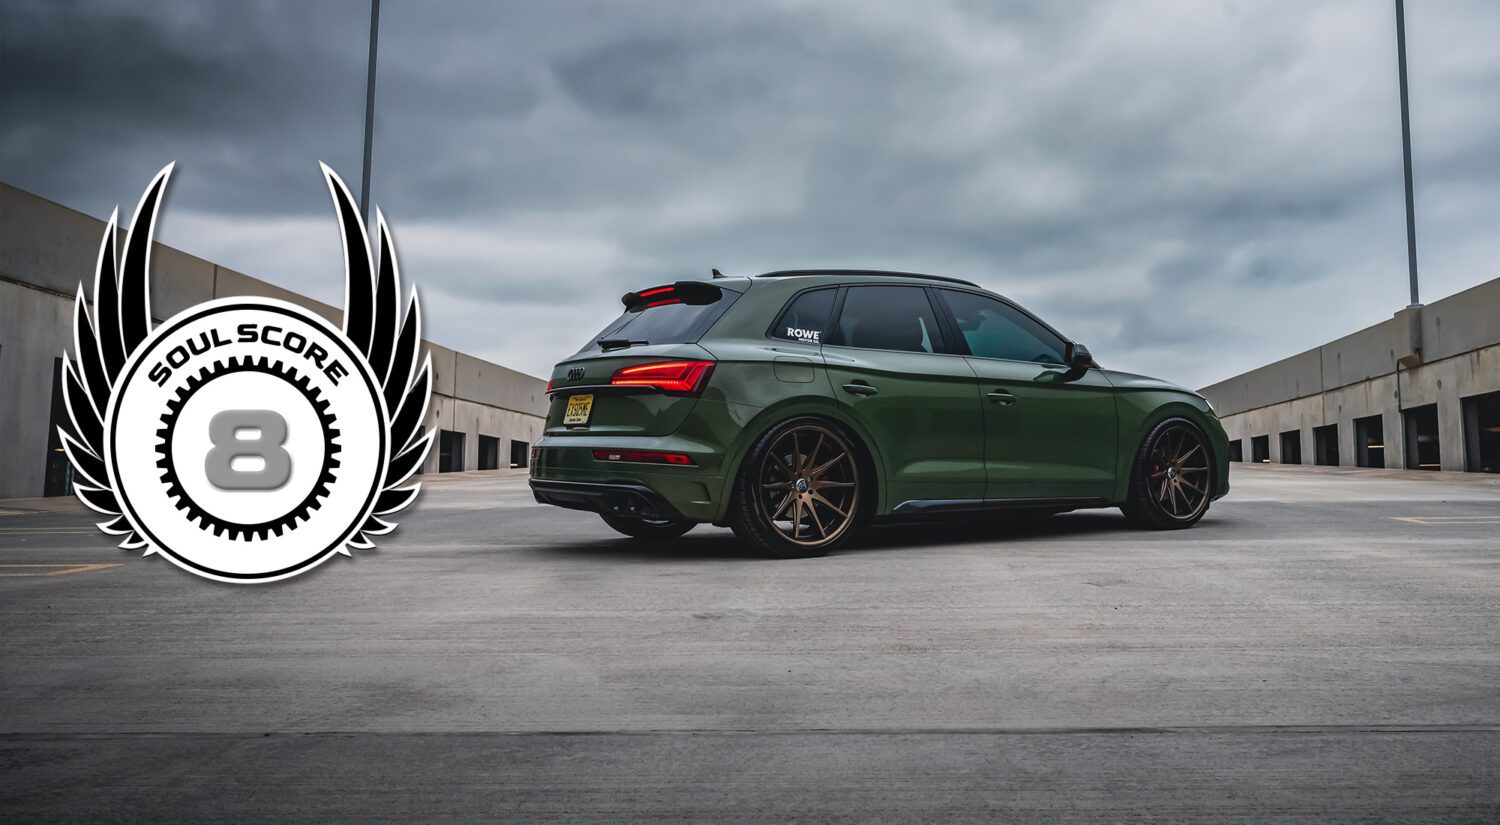 The Audi SQ5 is better without an R